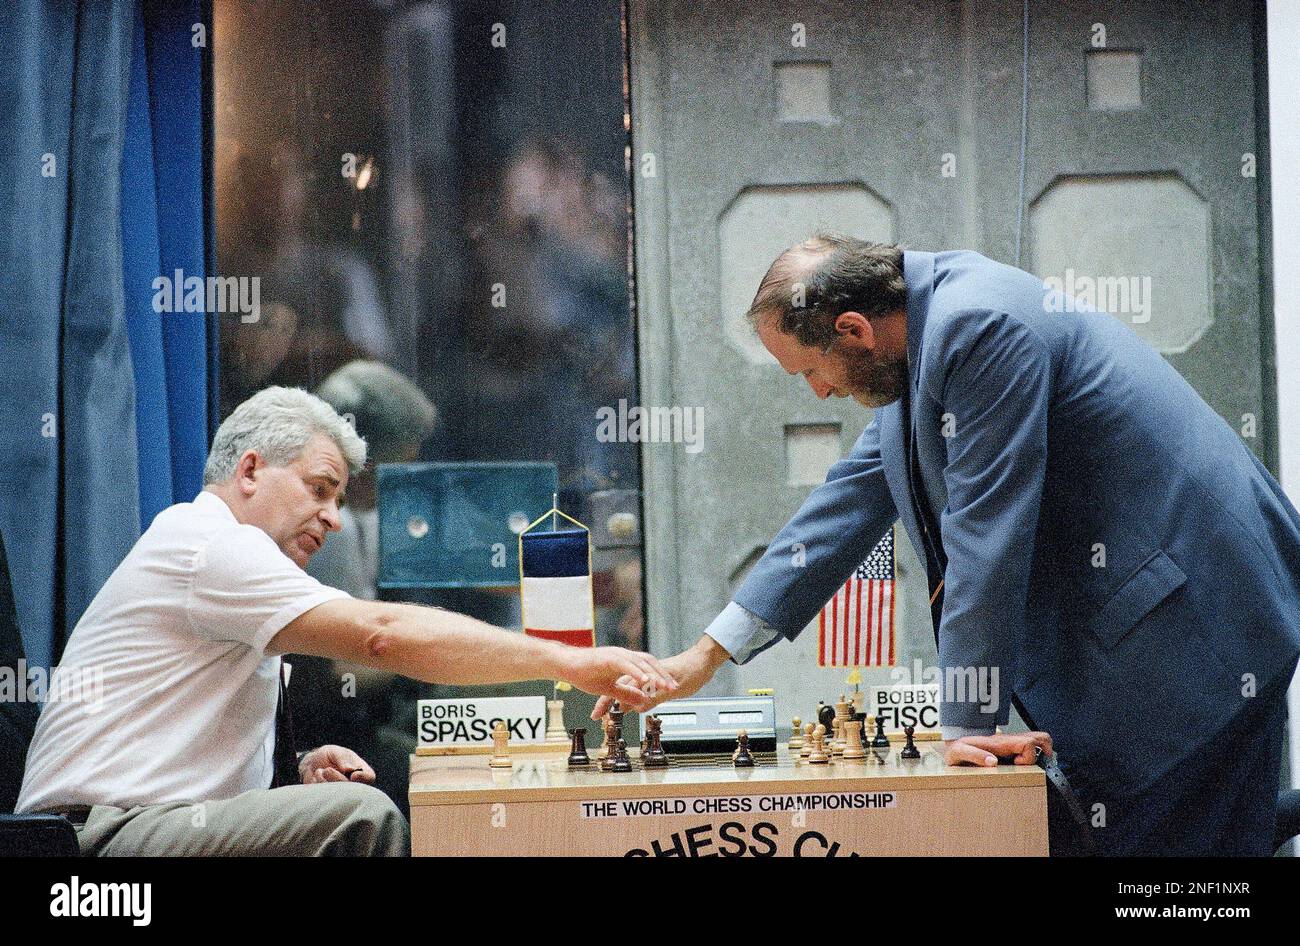 Chess.com on X: ♖ In 1960, Boris Spassky and Bobby Fischer faced off in a  game that would be the beginning of their friendship. ♖ Watch us break down  the game move